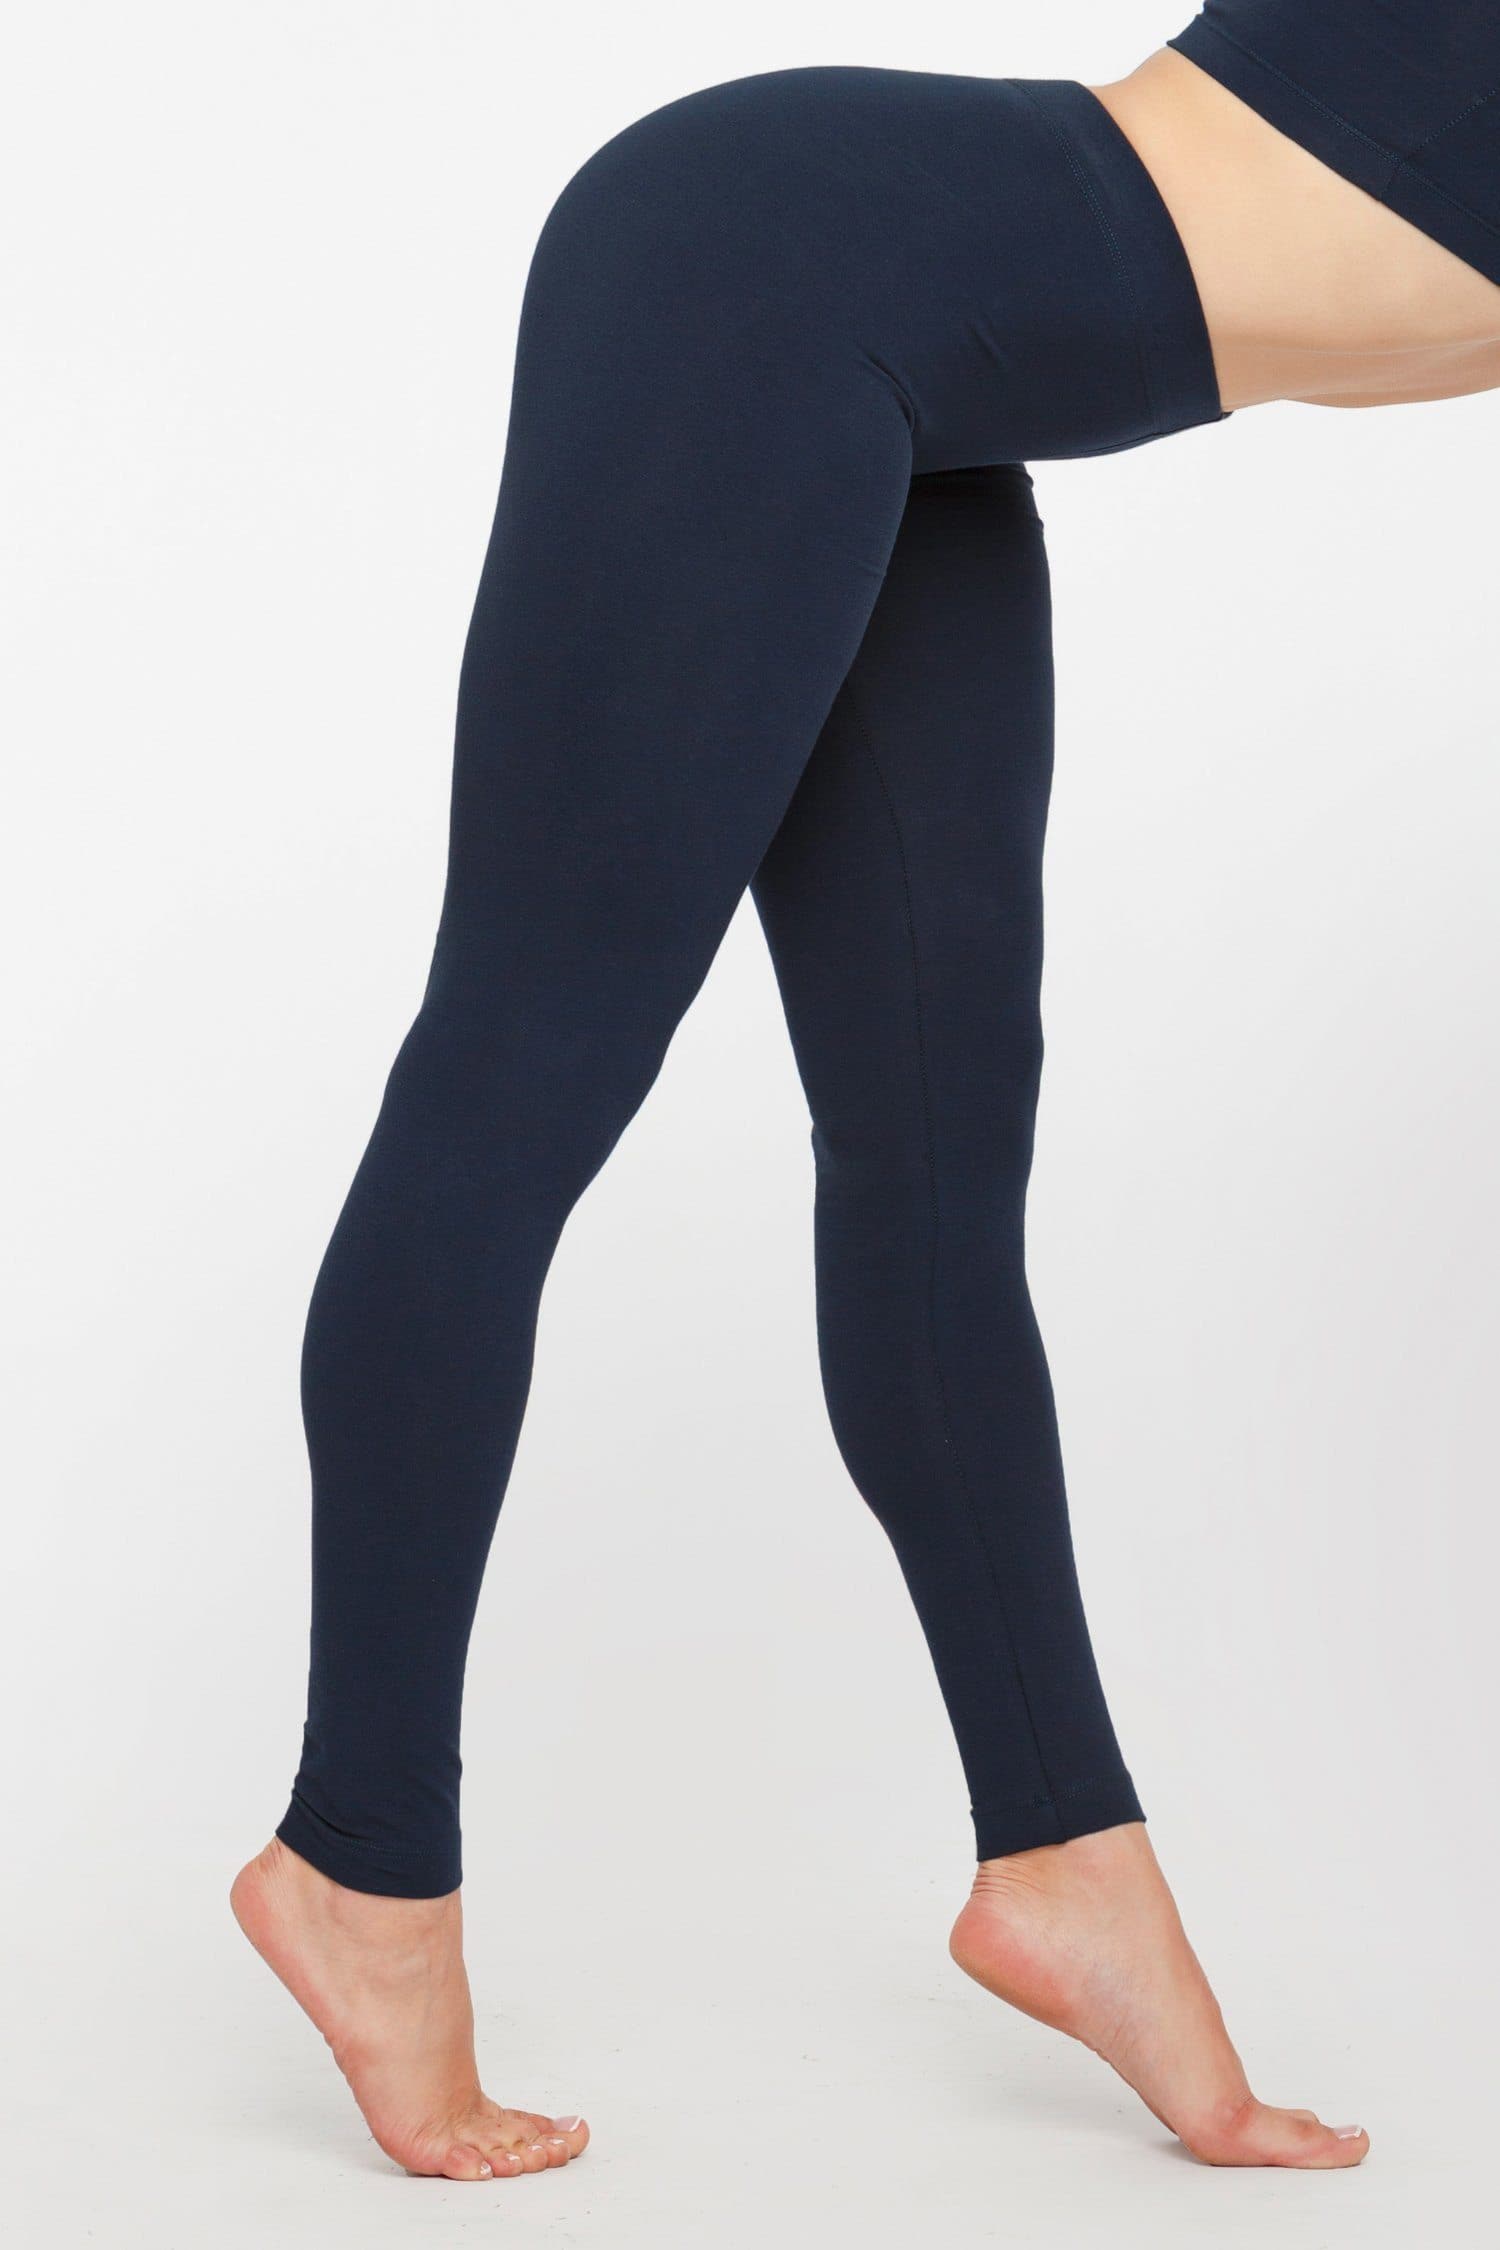 Ankle Fit Mixed Cotton with Spandex Stretchable Leggings Grey